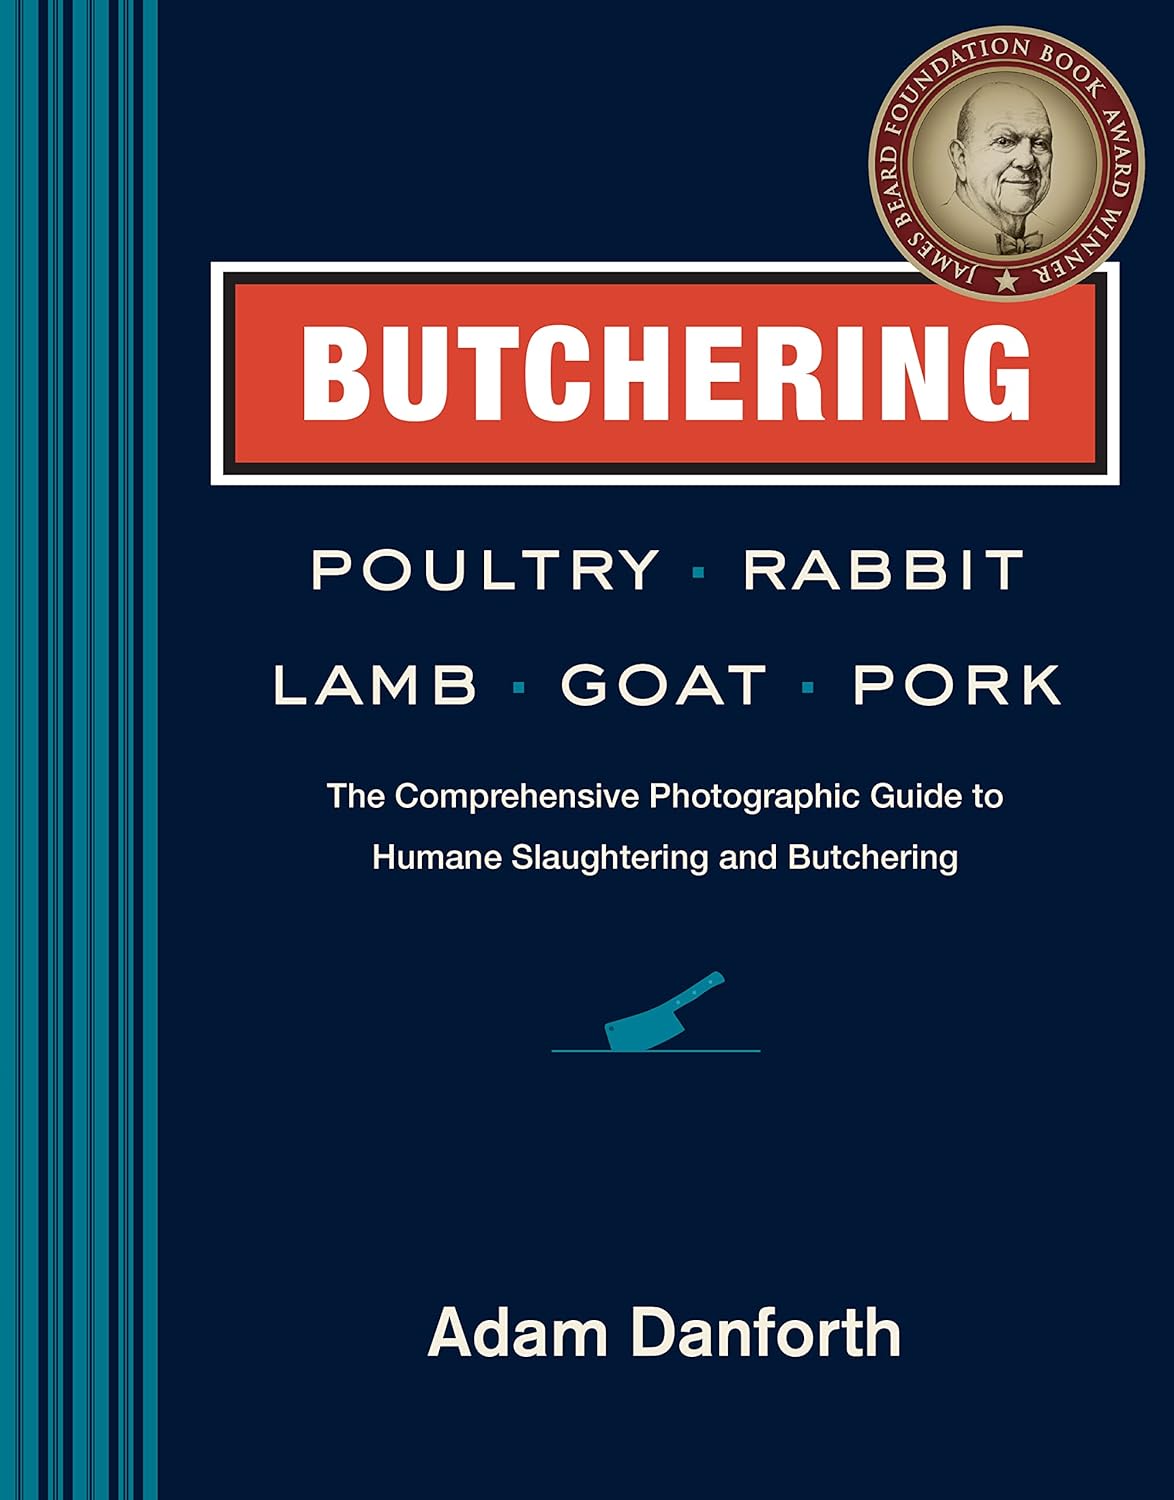 Butchering Poultry, Rabbit, Lamb, Goat, and Pork: The Comprehensive Photographic Guide to Humane Slaughtering and Butchering Hardcover by Adam Danforth